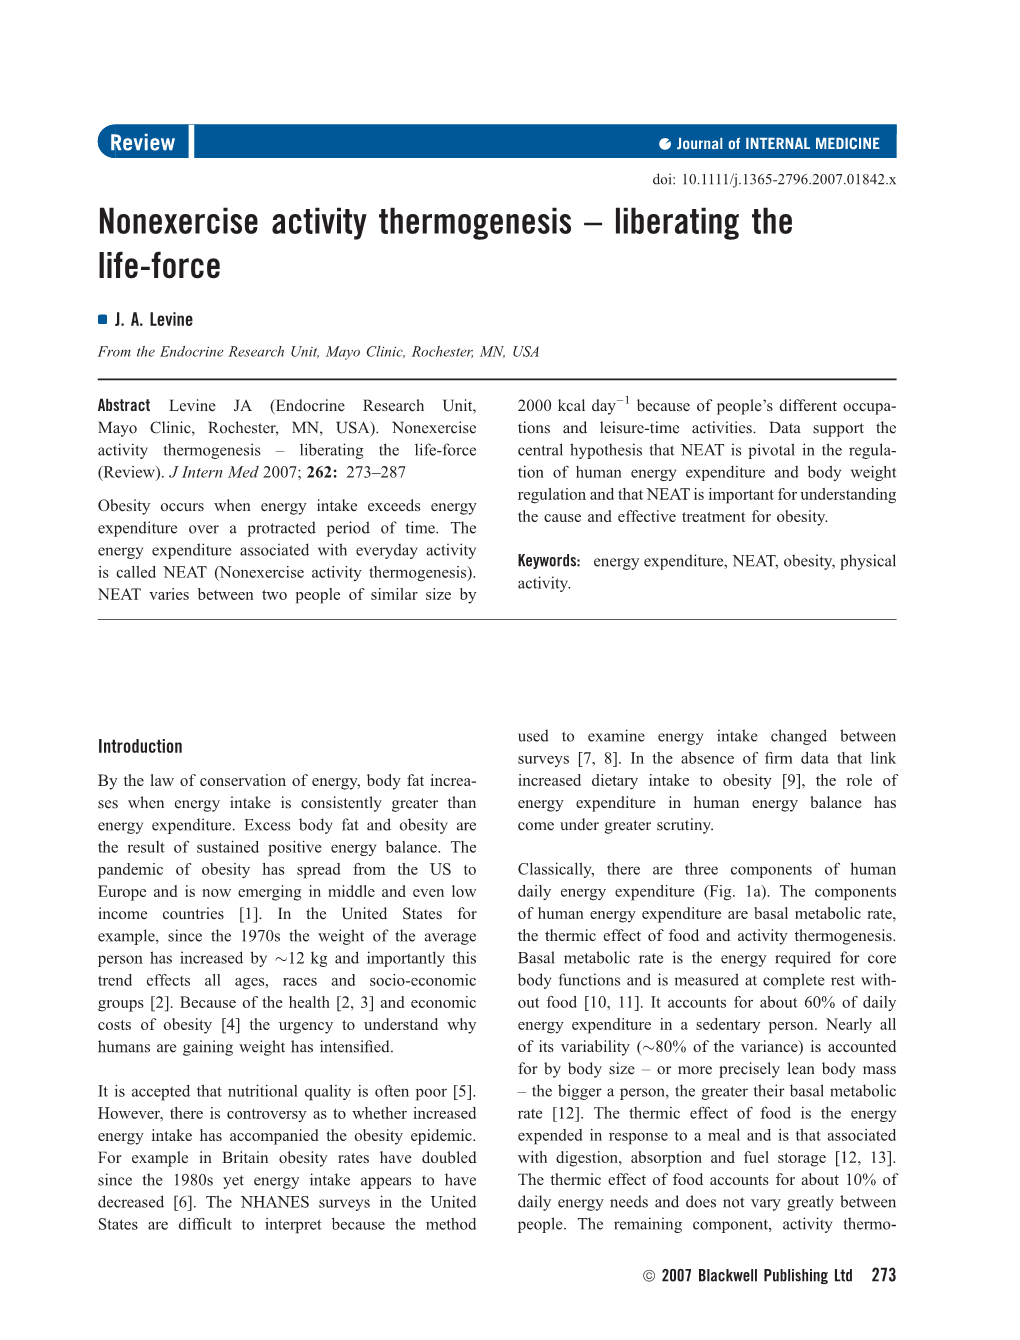 Nonexercise Activity Thermogenesis – Liberating the Life-Force